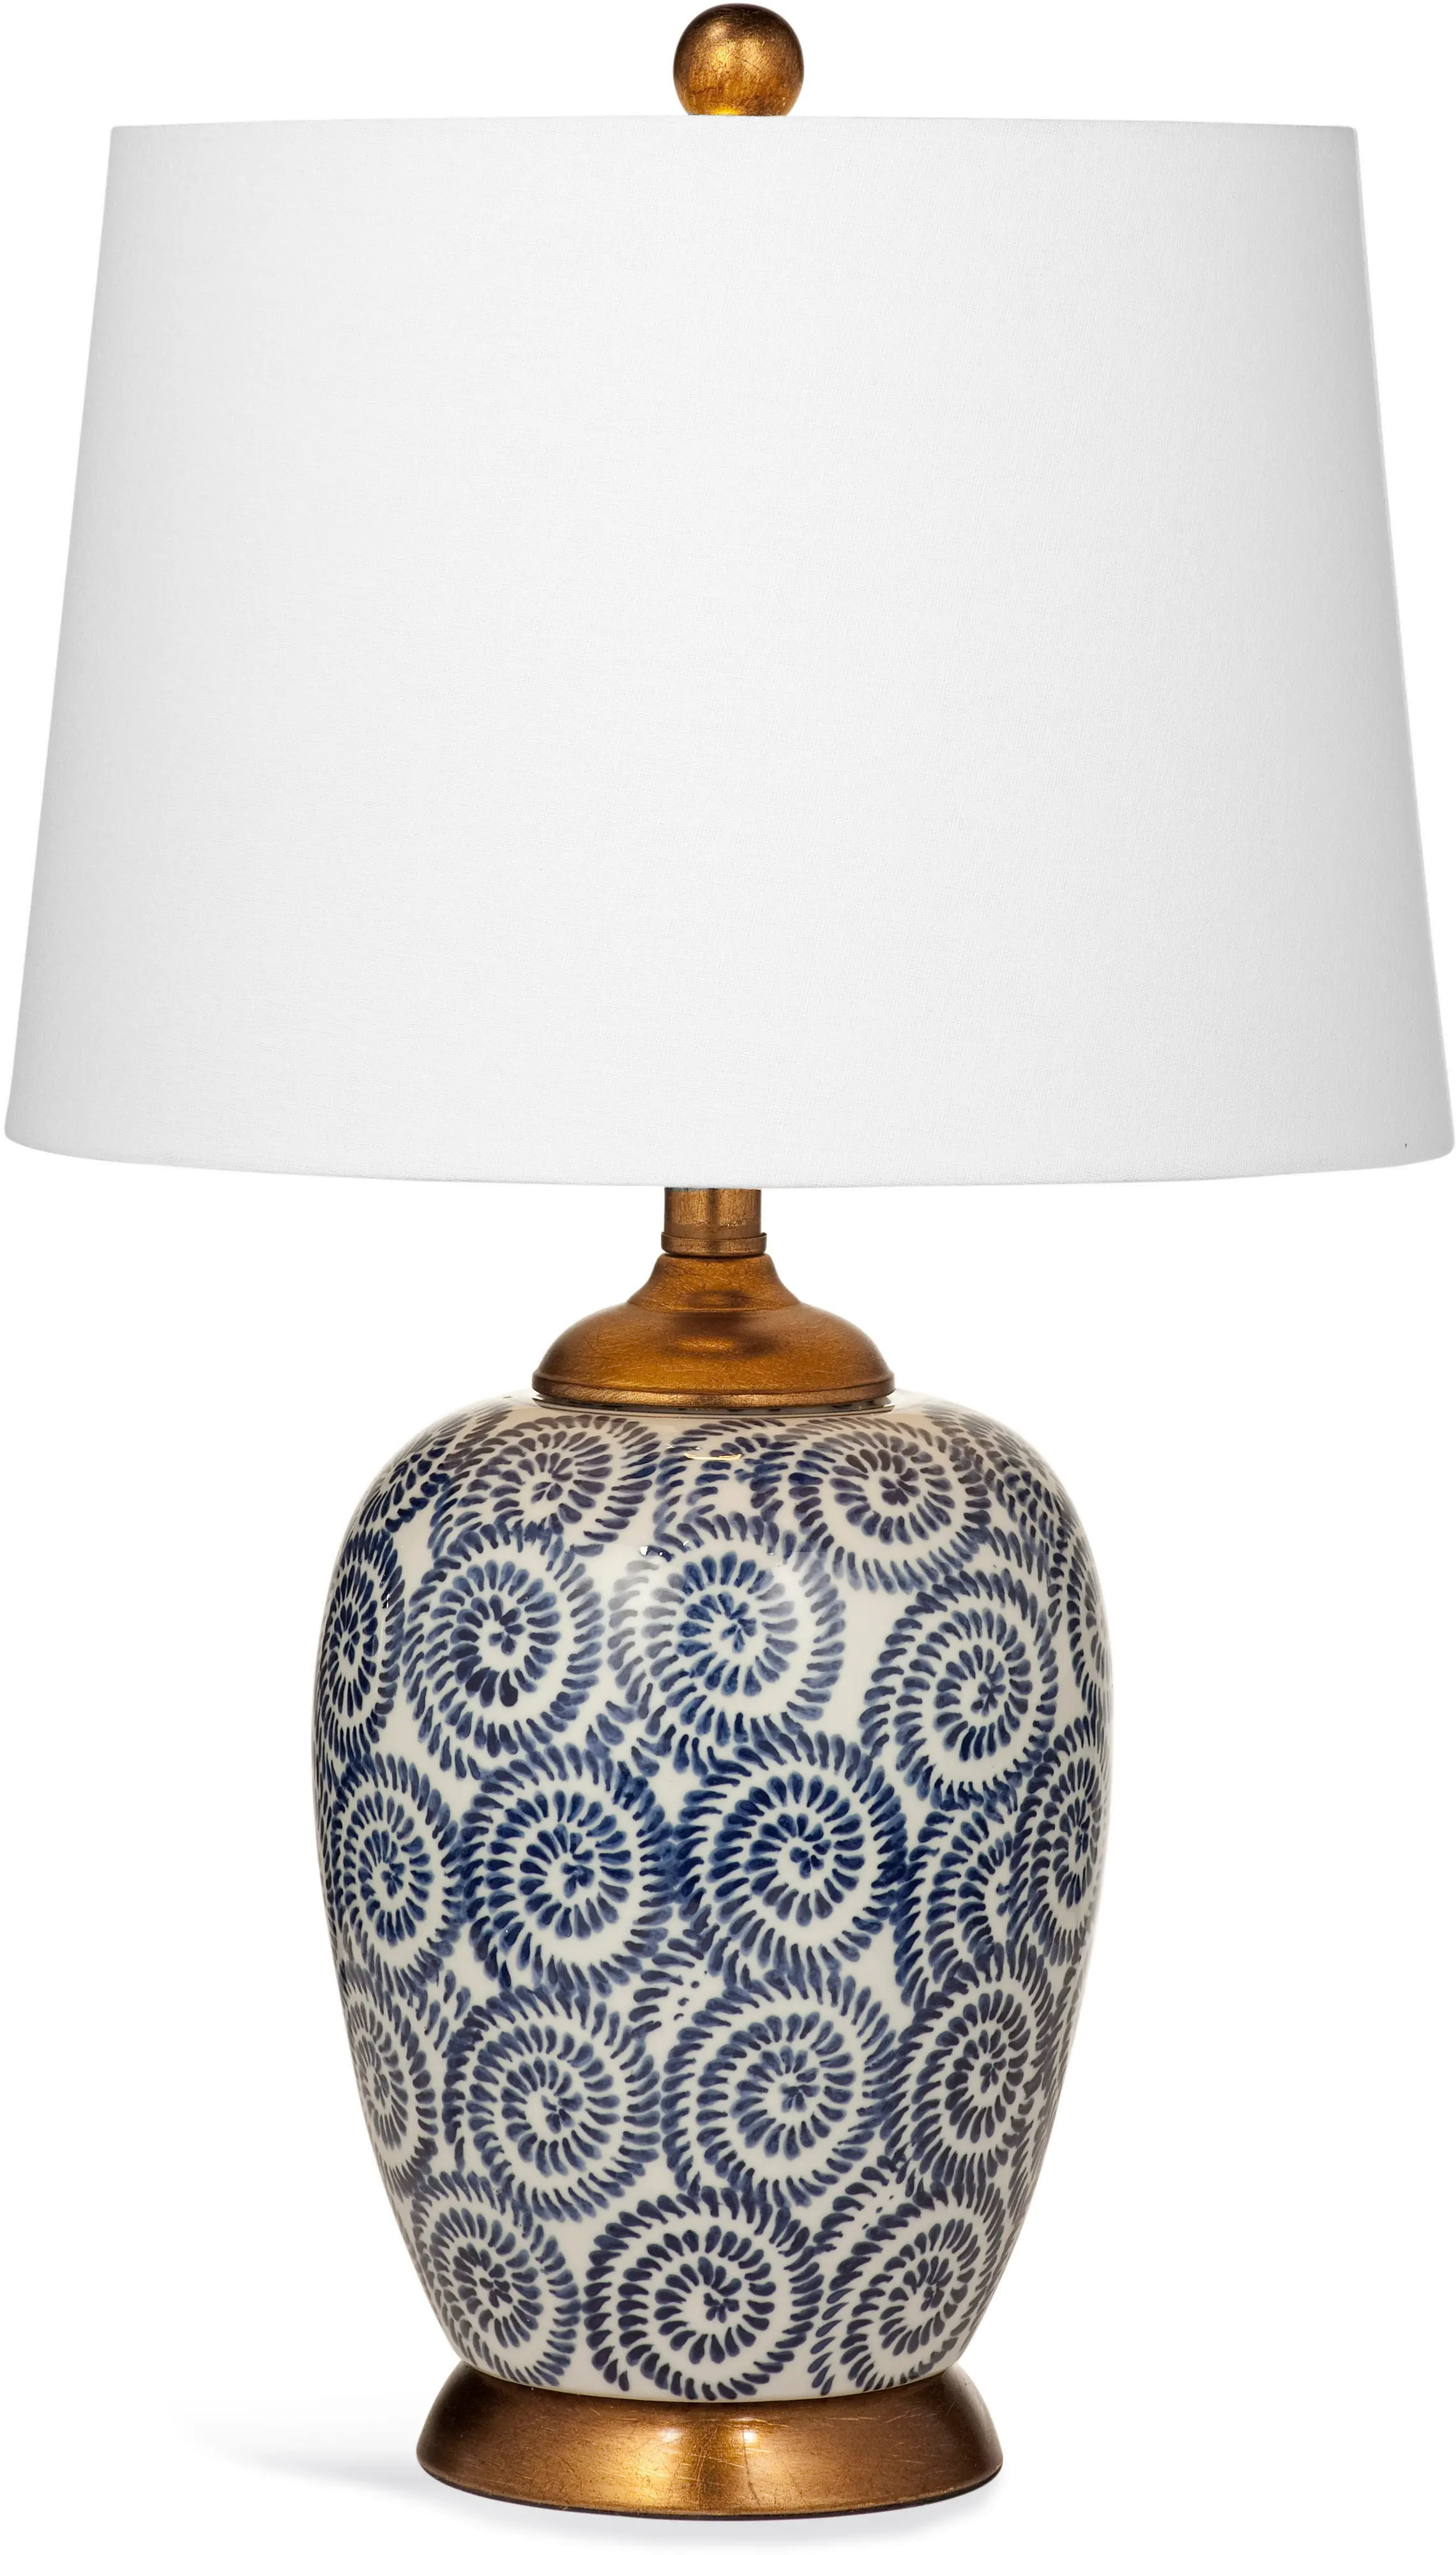 Royal Blue and White Spiral Table Lamp with Rustic Bronze Base